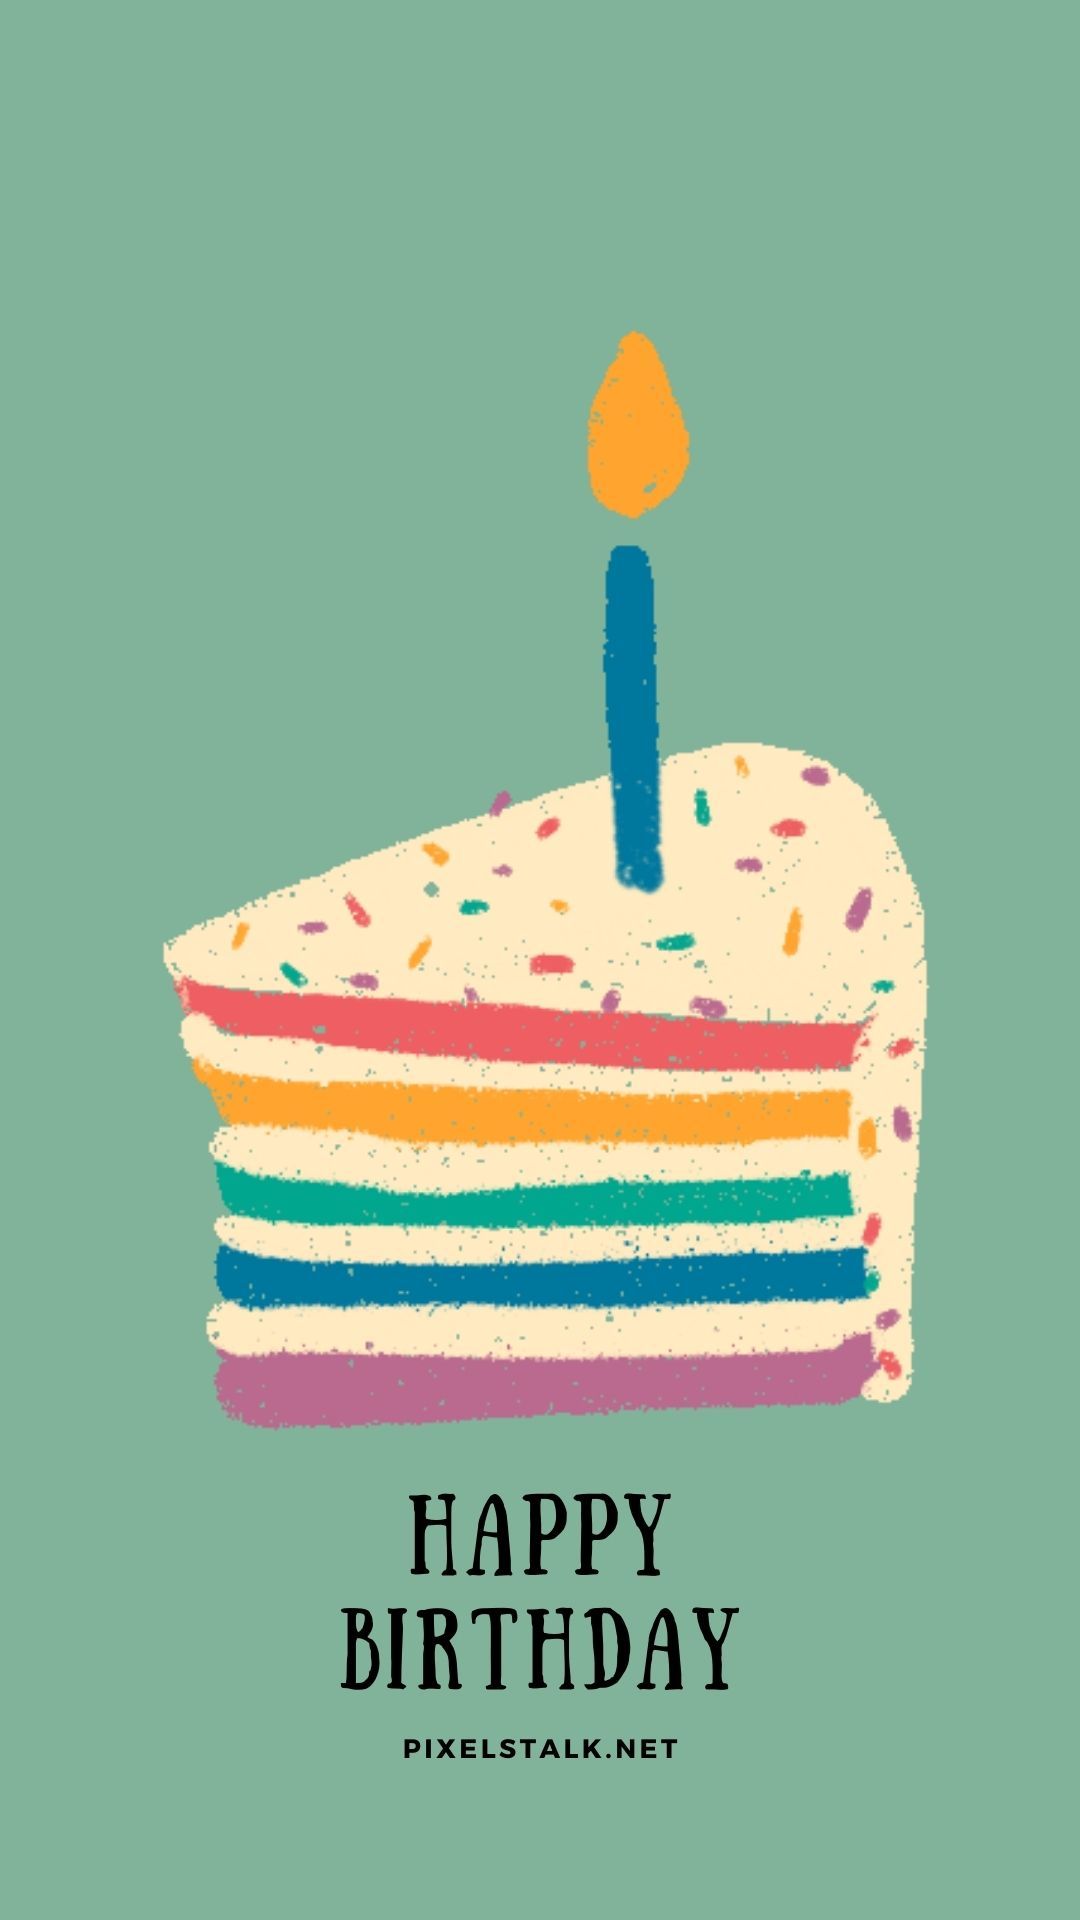 A birthday cake with a single candle on a green background - Cake, birthday